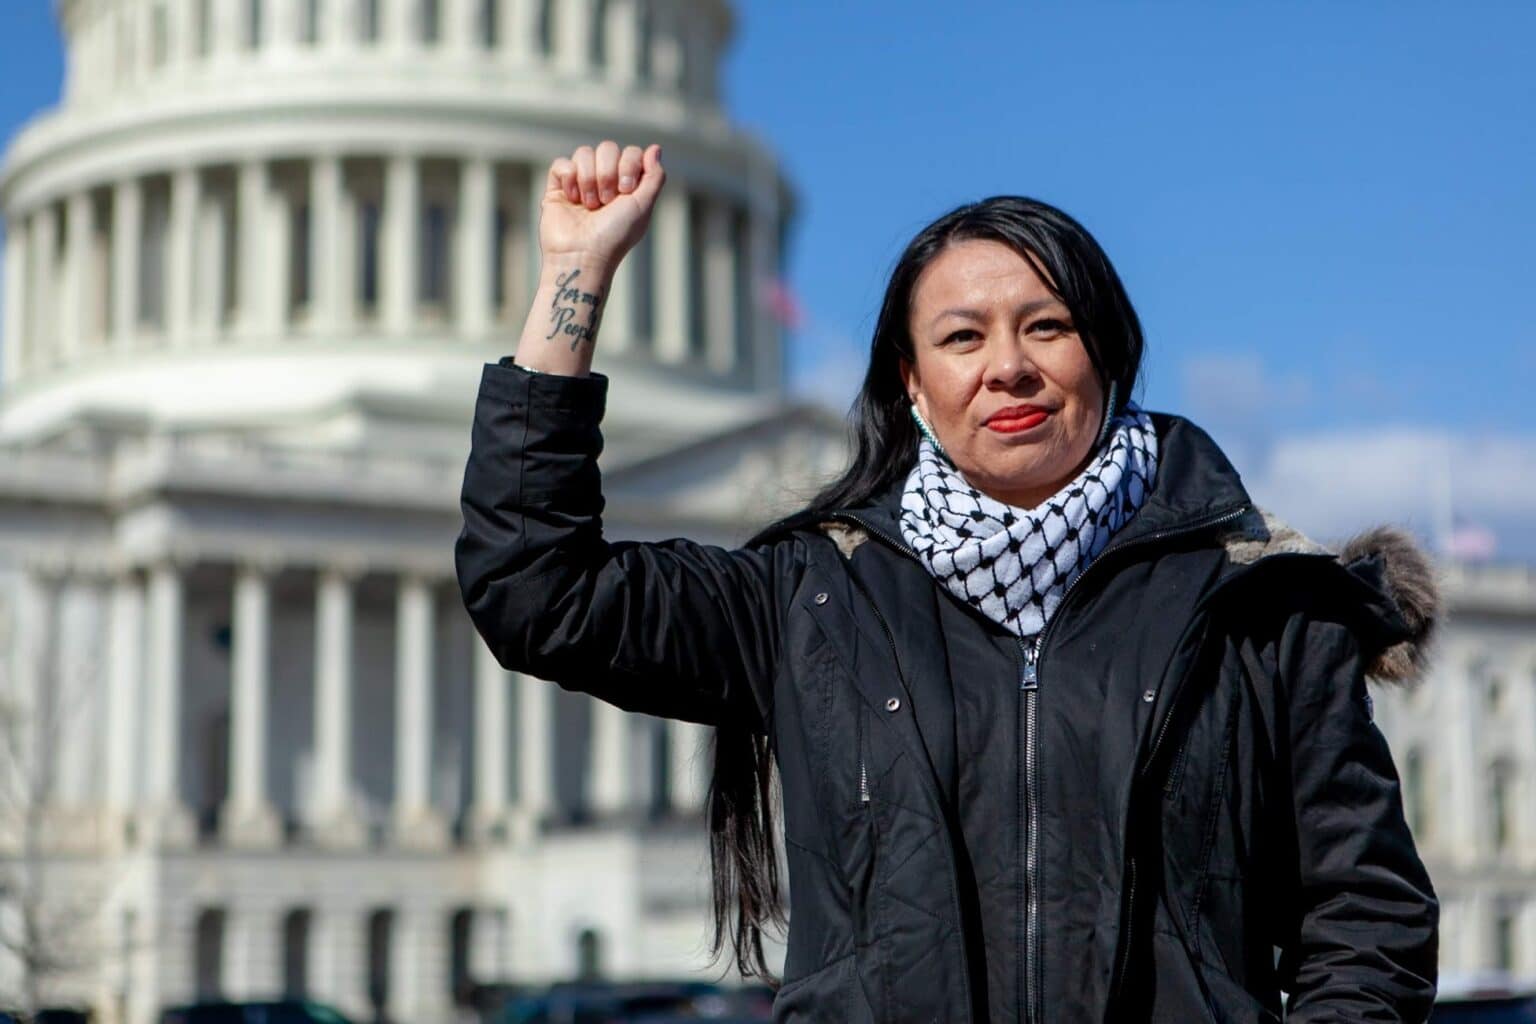 A woman raises a fist in front of the U.S. Capitol